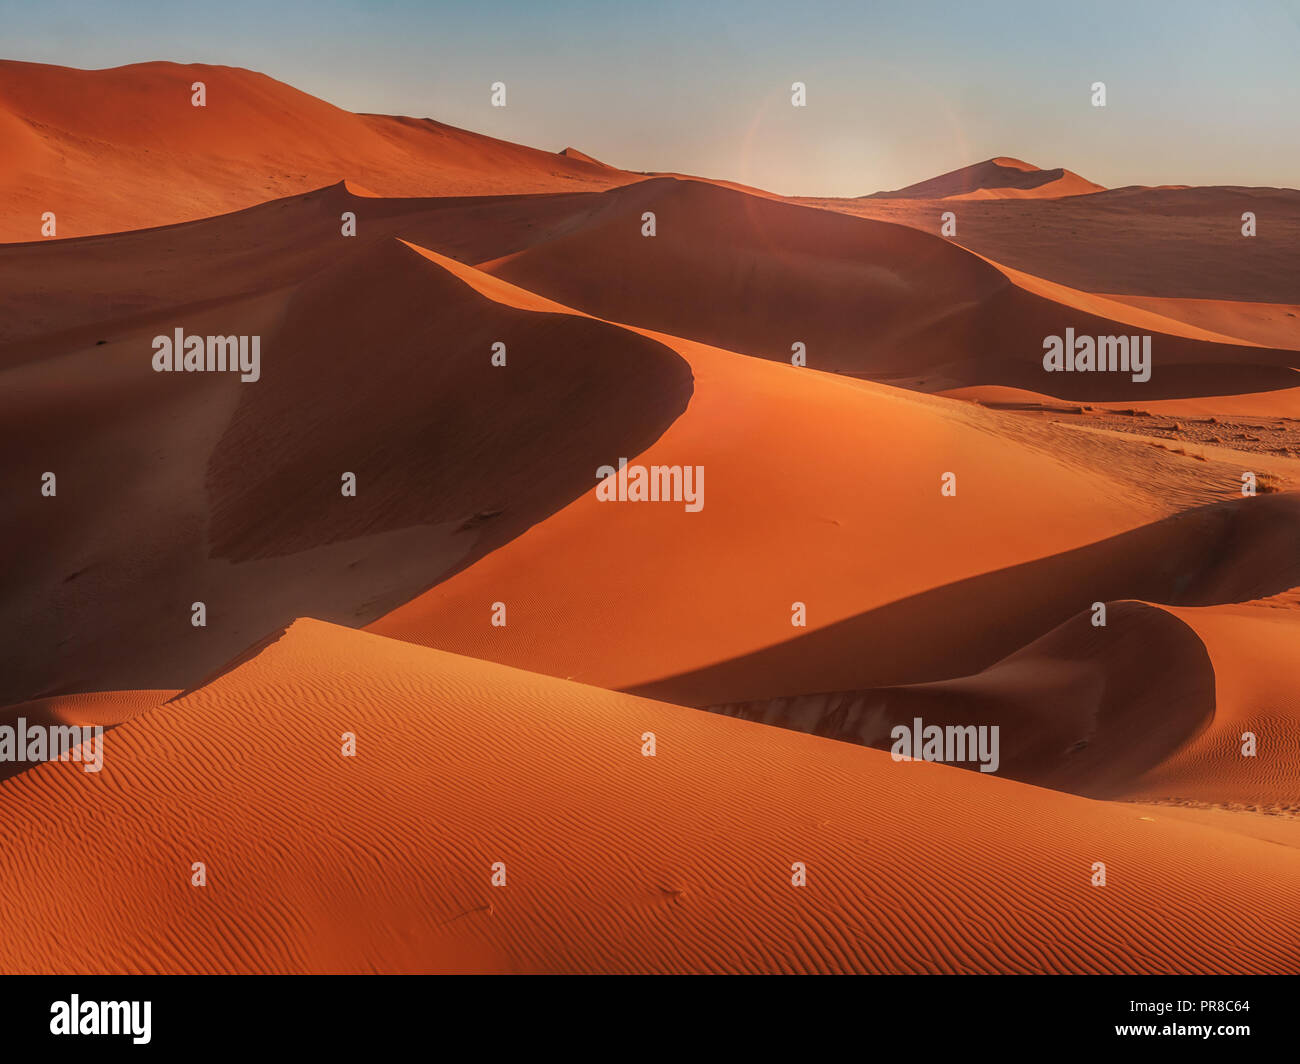 The Red Sand Dunes In Namibia by José Gieskes Fotografie